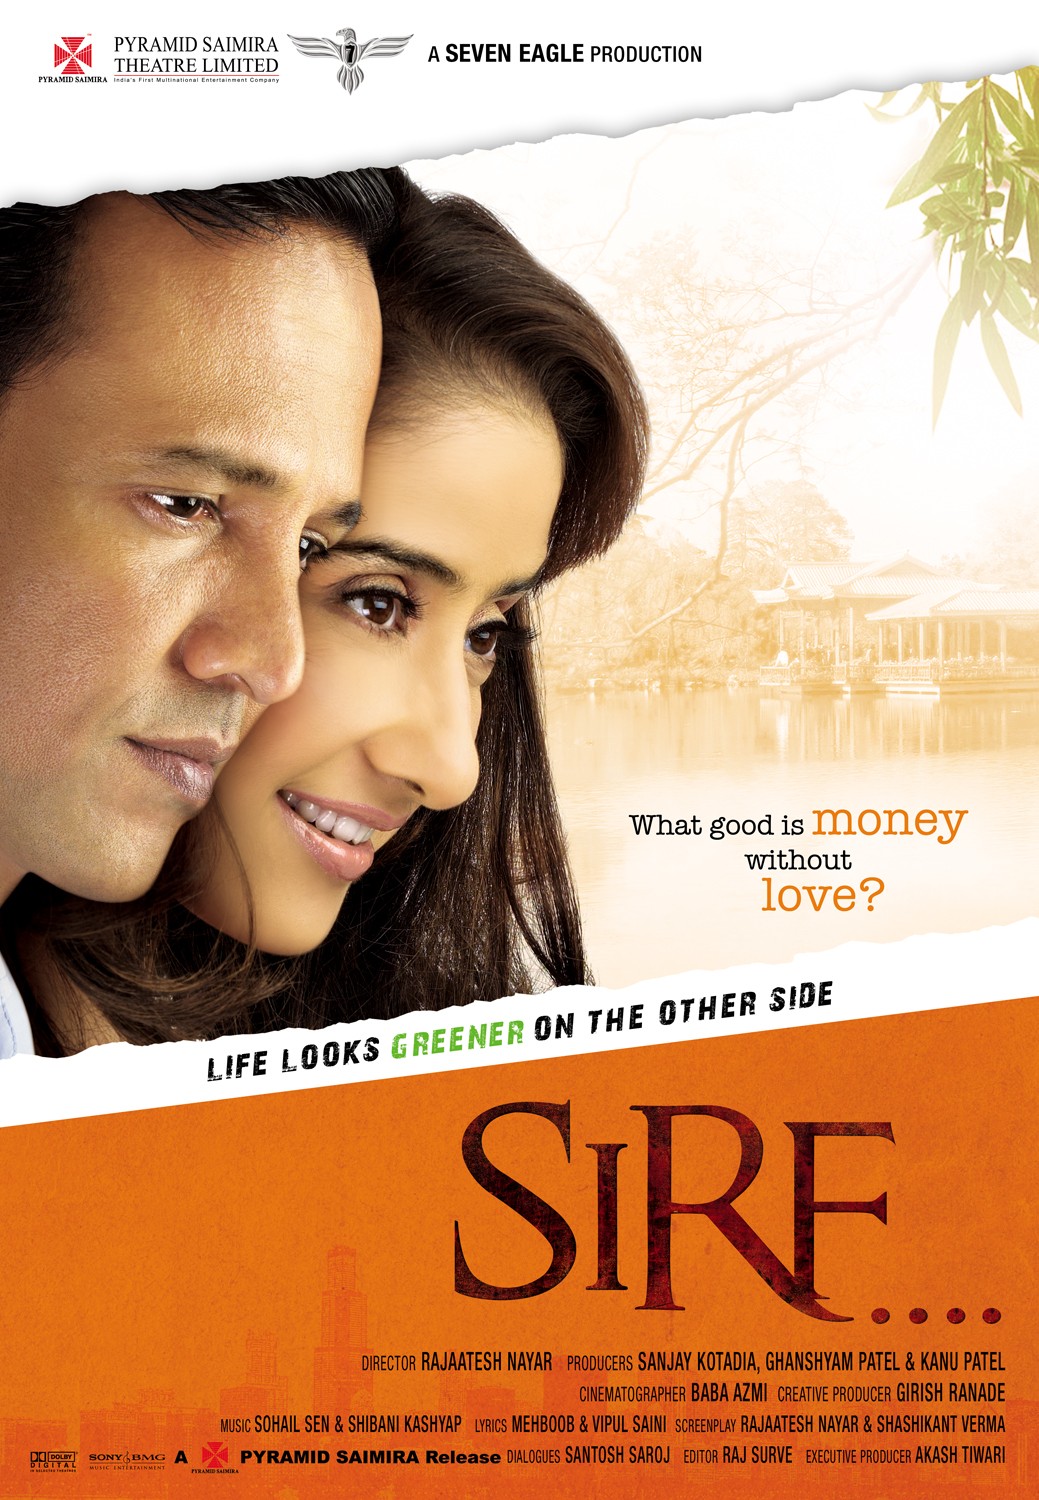 Extra Large Movie Poster Image for Sirf....: Life Looks Greener on the Other Side (#4 of 5)